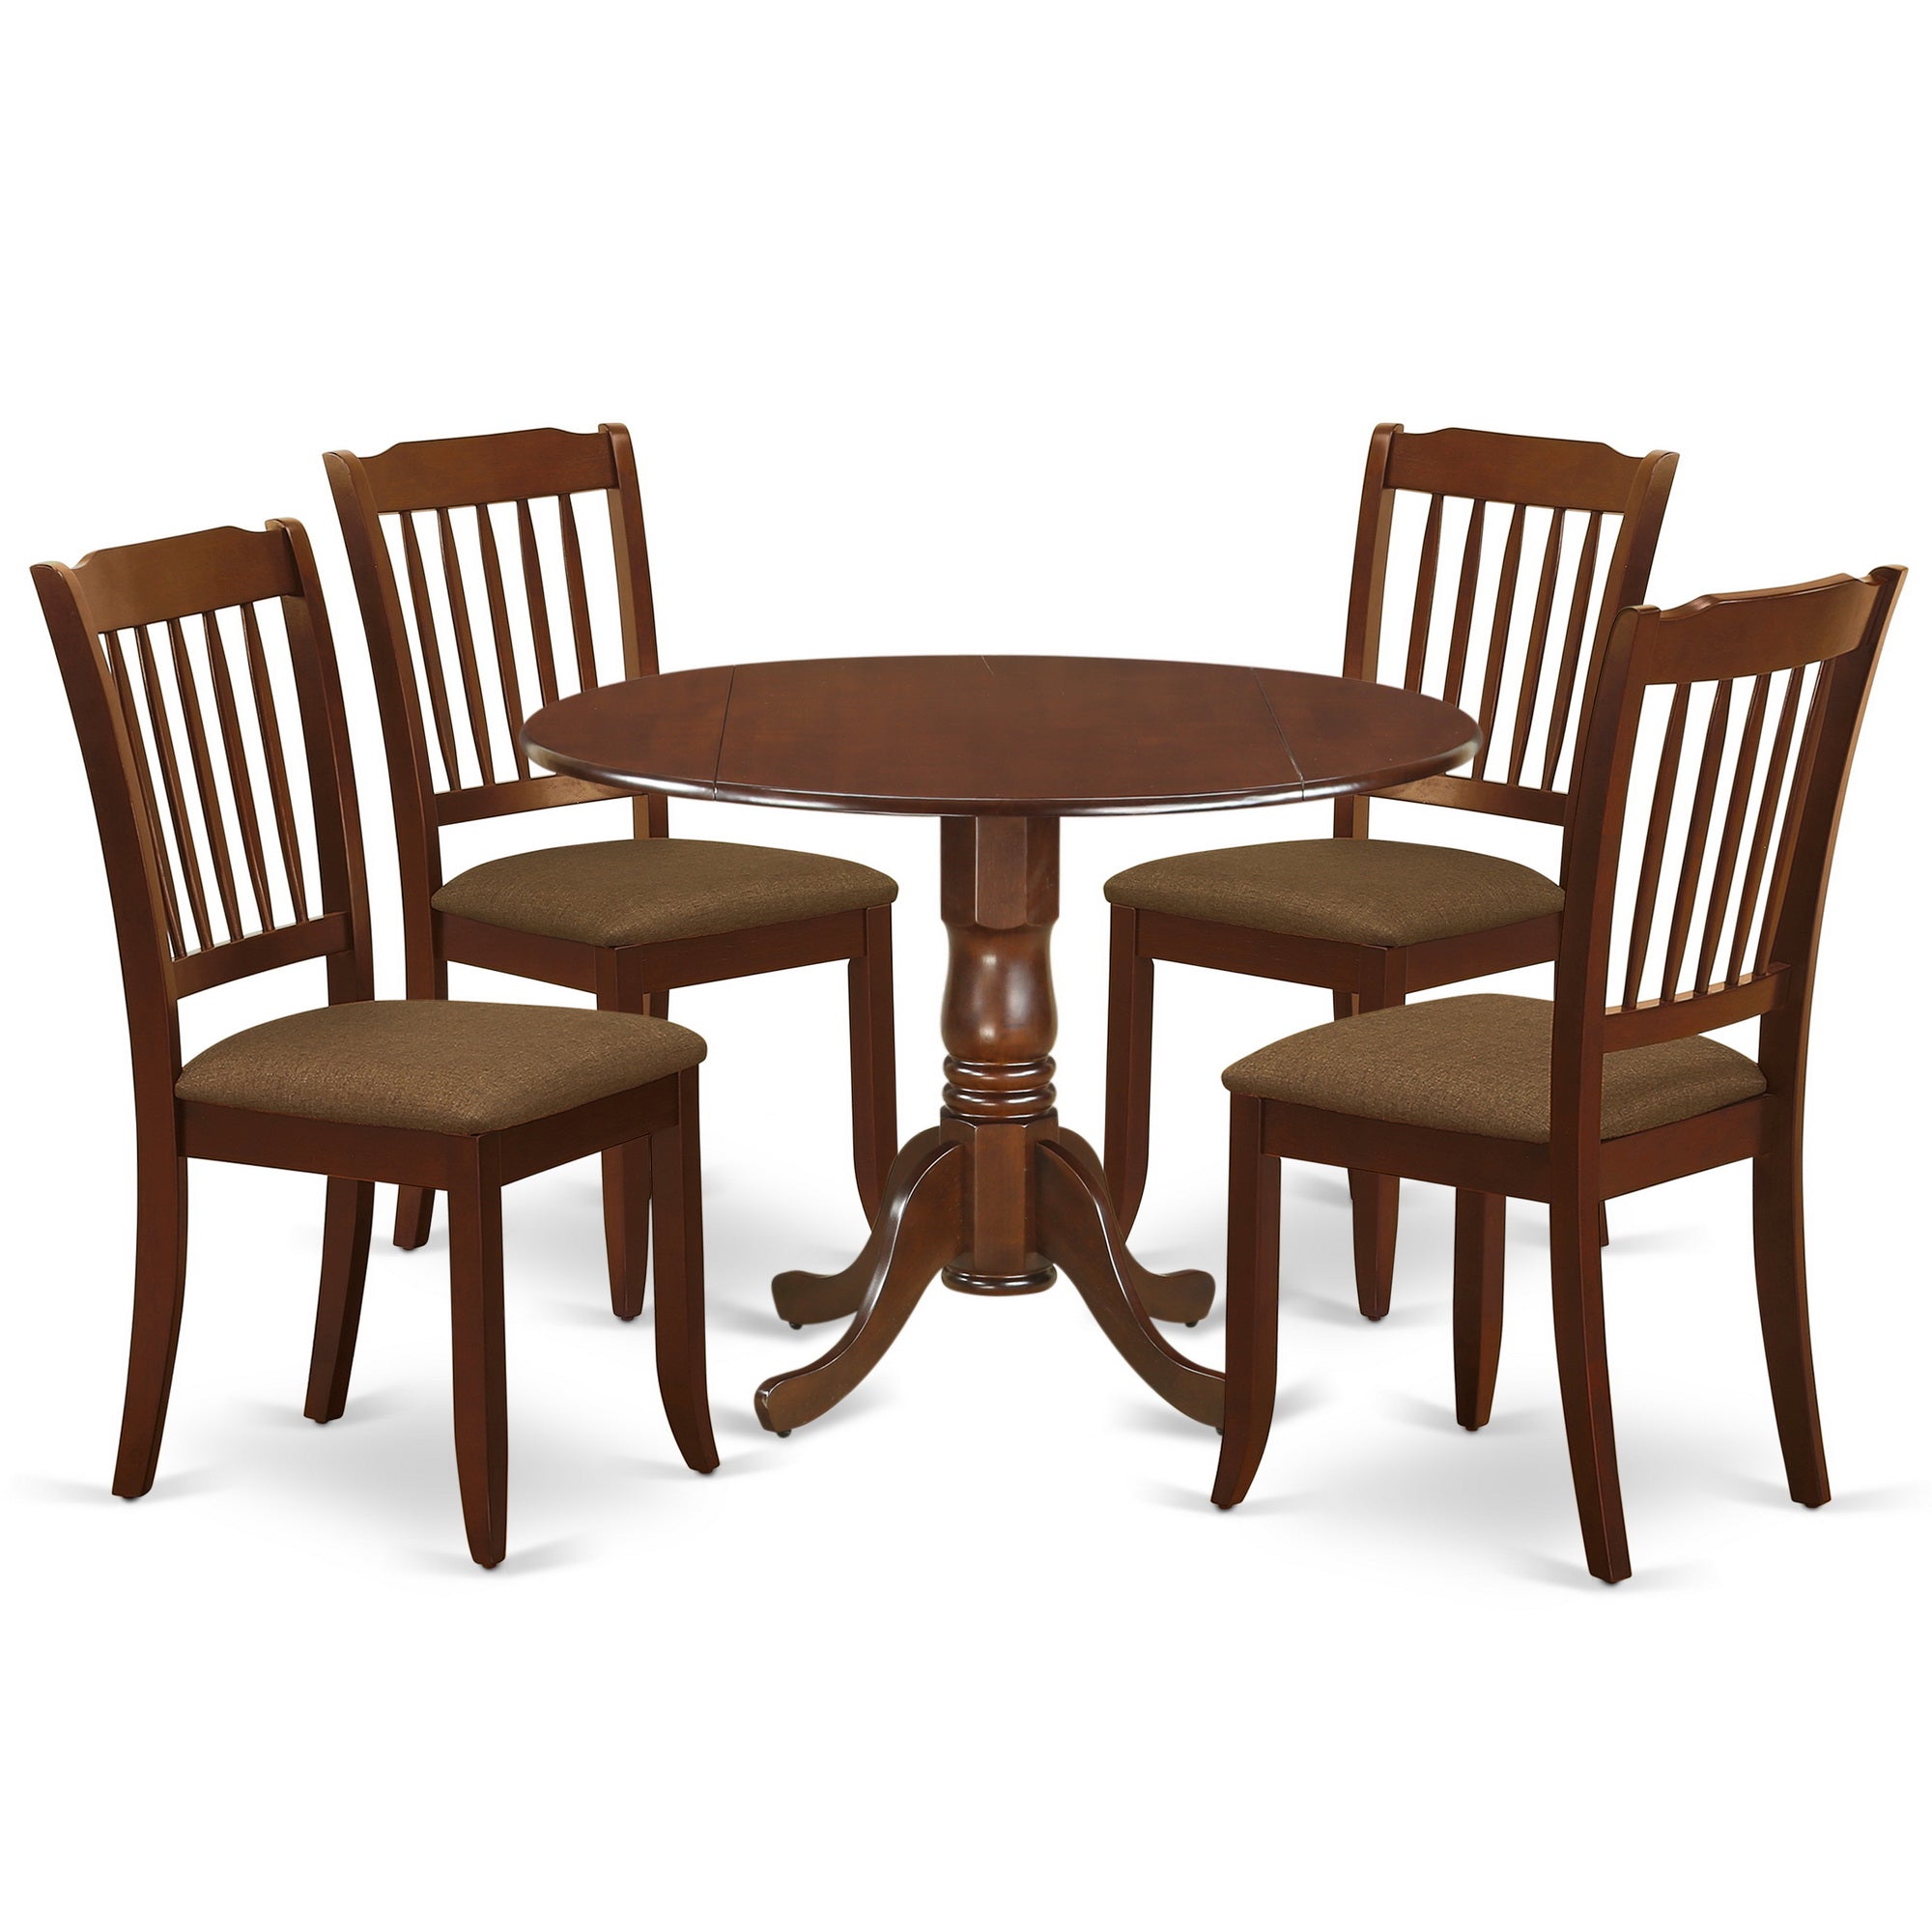 DLDA5-MAH-C 5Pc Dining Set Includes a Round Dinette Table with Drop Leaves and Four Vertical Slatted Microfiber Seat Kitchen Chairs, Mahogany Finish